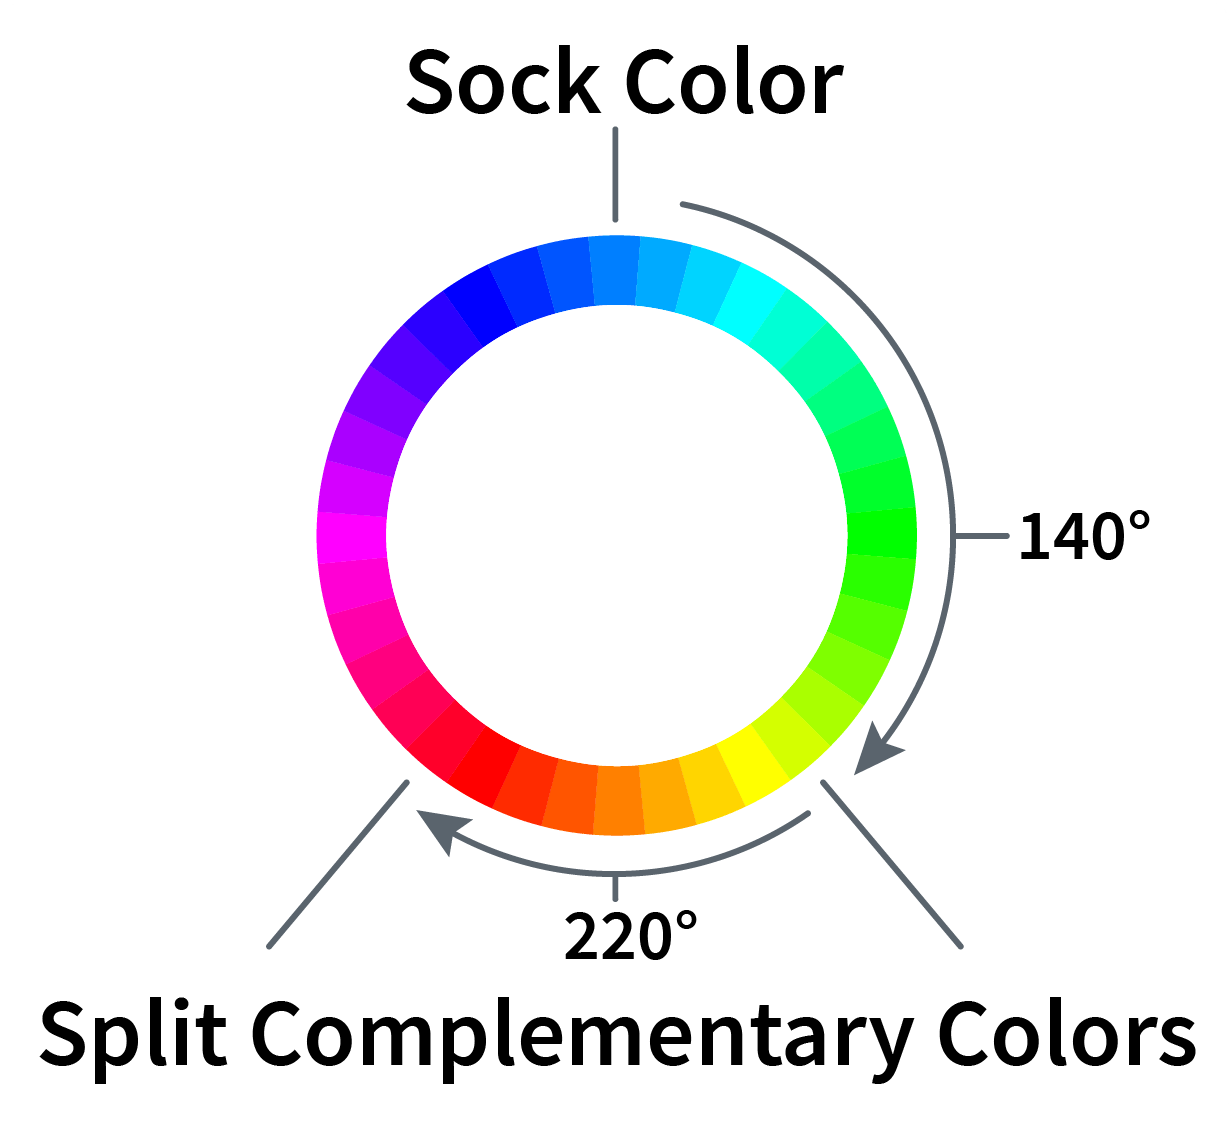 A color wheel showing a rotation of 180 degrees between our sock color and the complementary color.